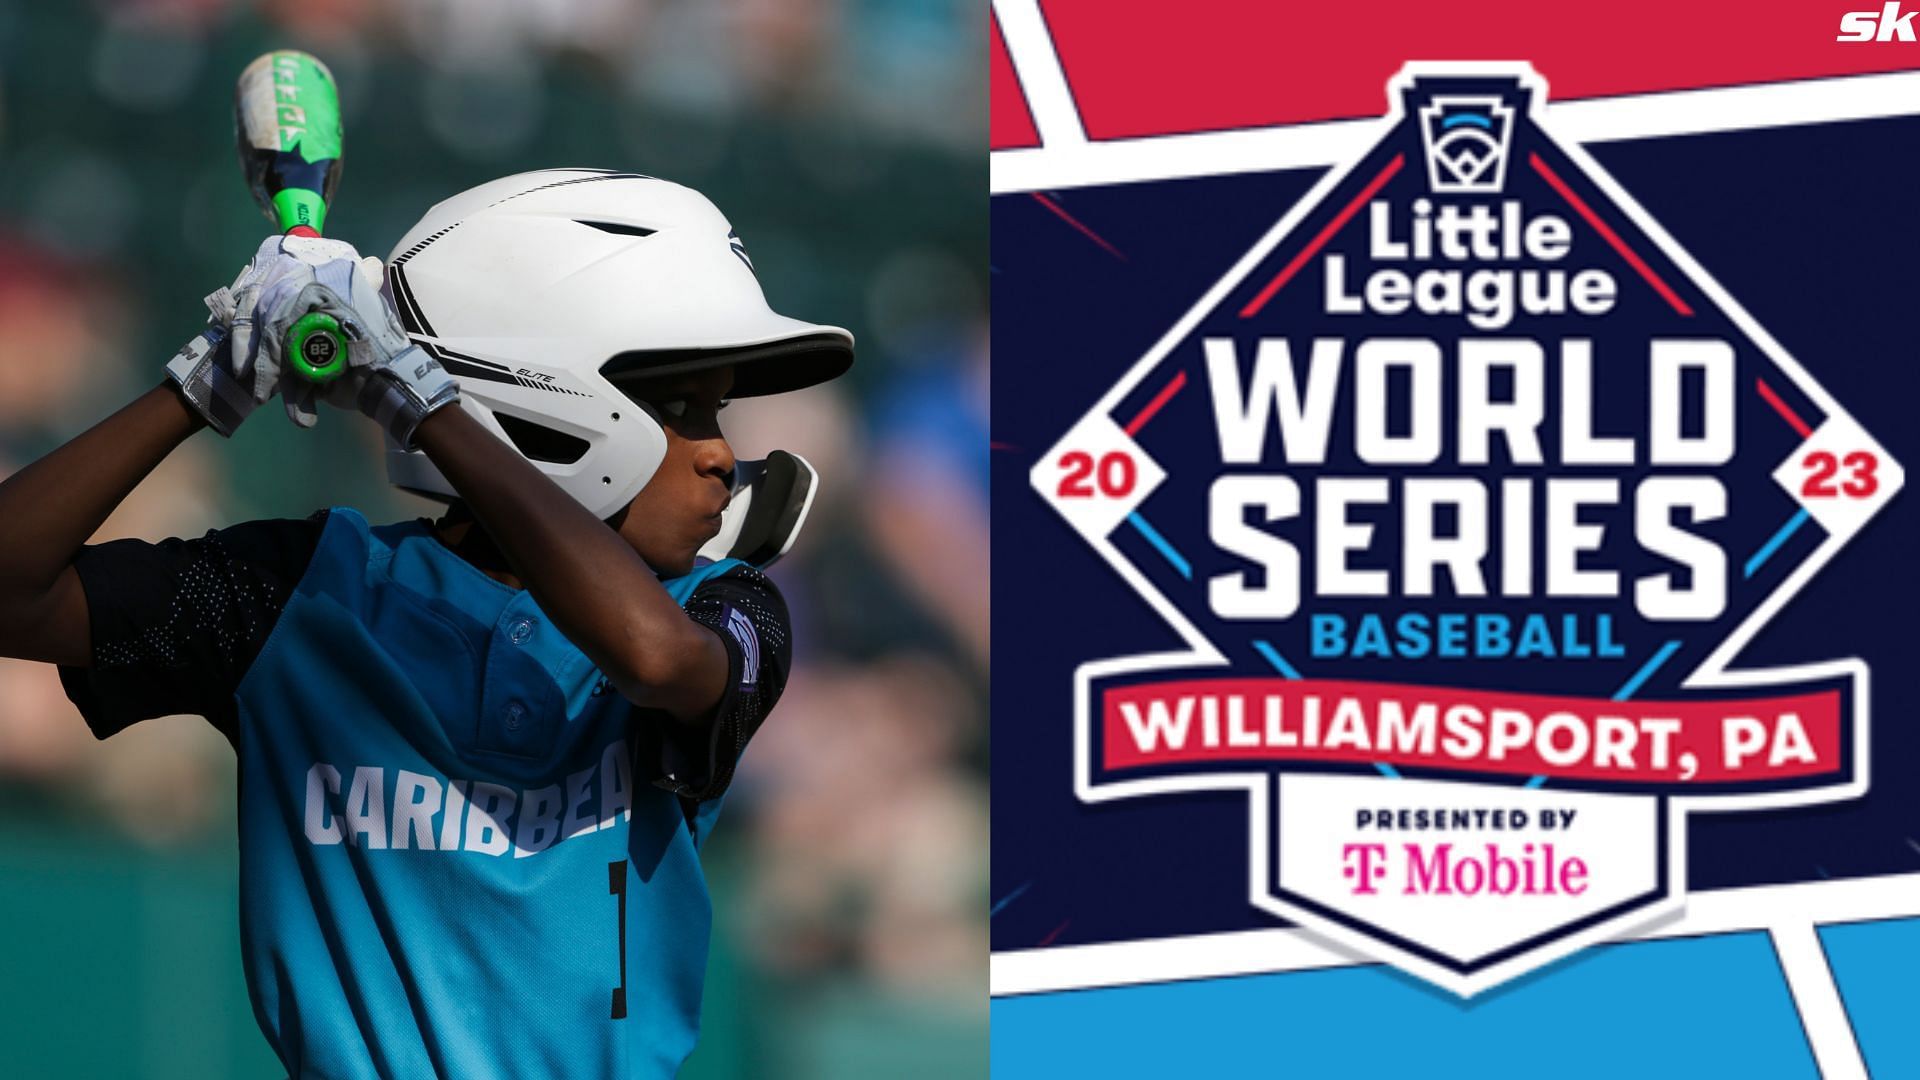 Northern California vs Hawaii Little League World Series 2023 Venue, start time and TV details